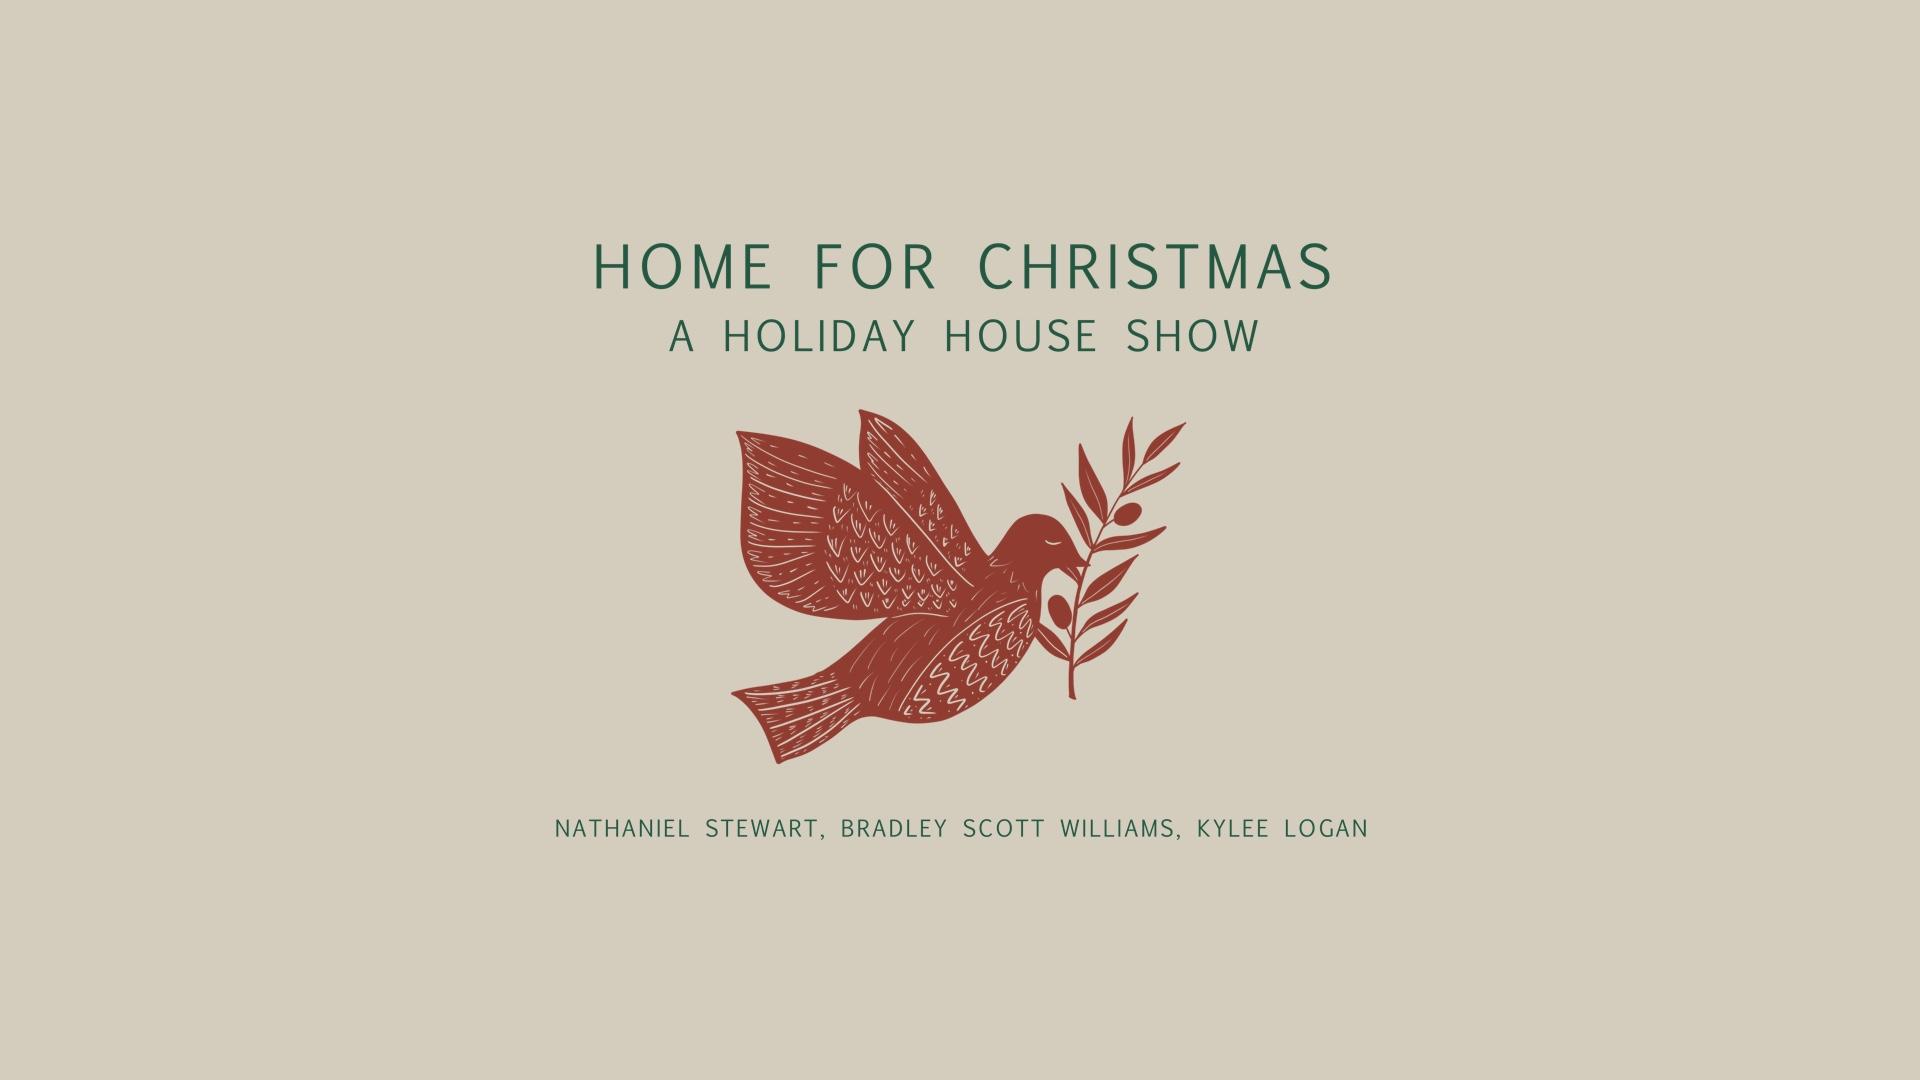 Home For Christmas - A Holiday House Show